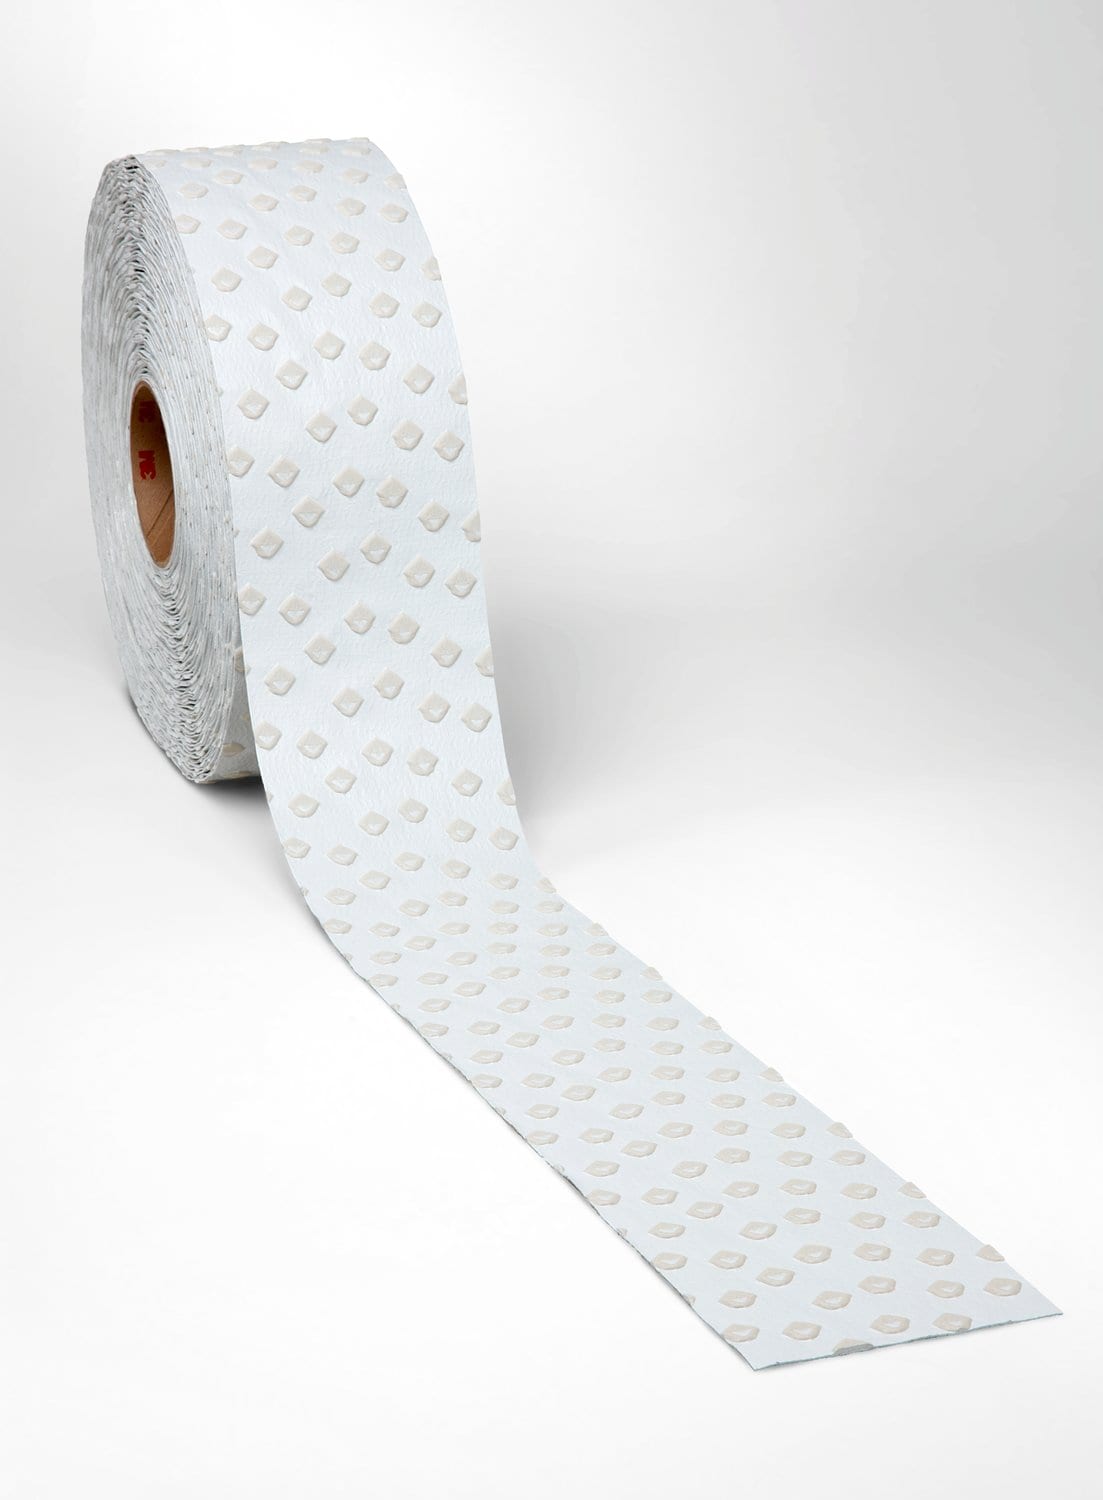 7100314632 - 3M Stamark Removable Pavement Marking Tape A715 Black, IL Only, 5 in x 120 yd